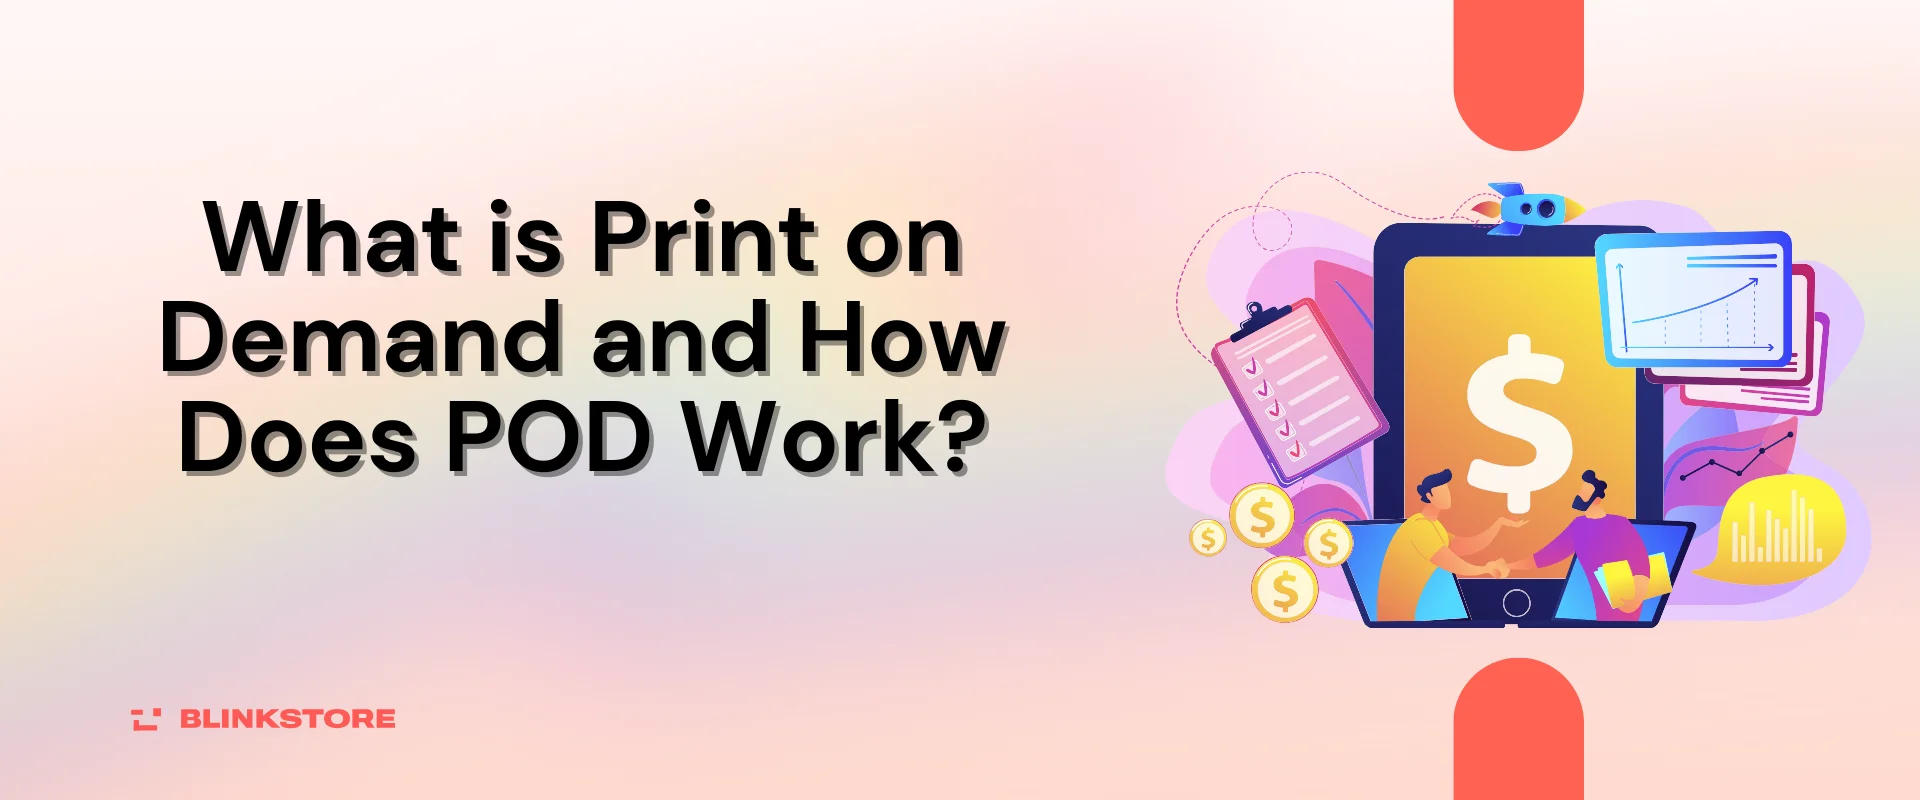 What is Print on Demand and How Does POD Work